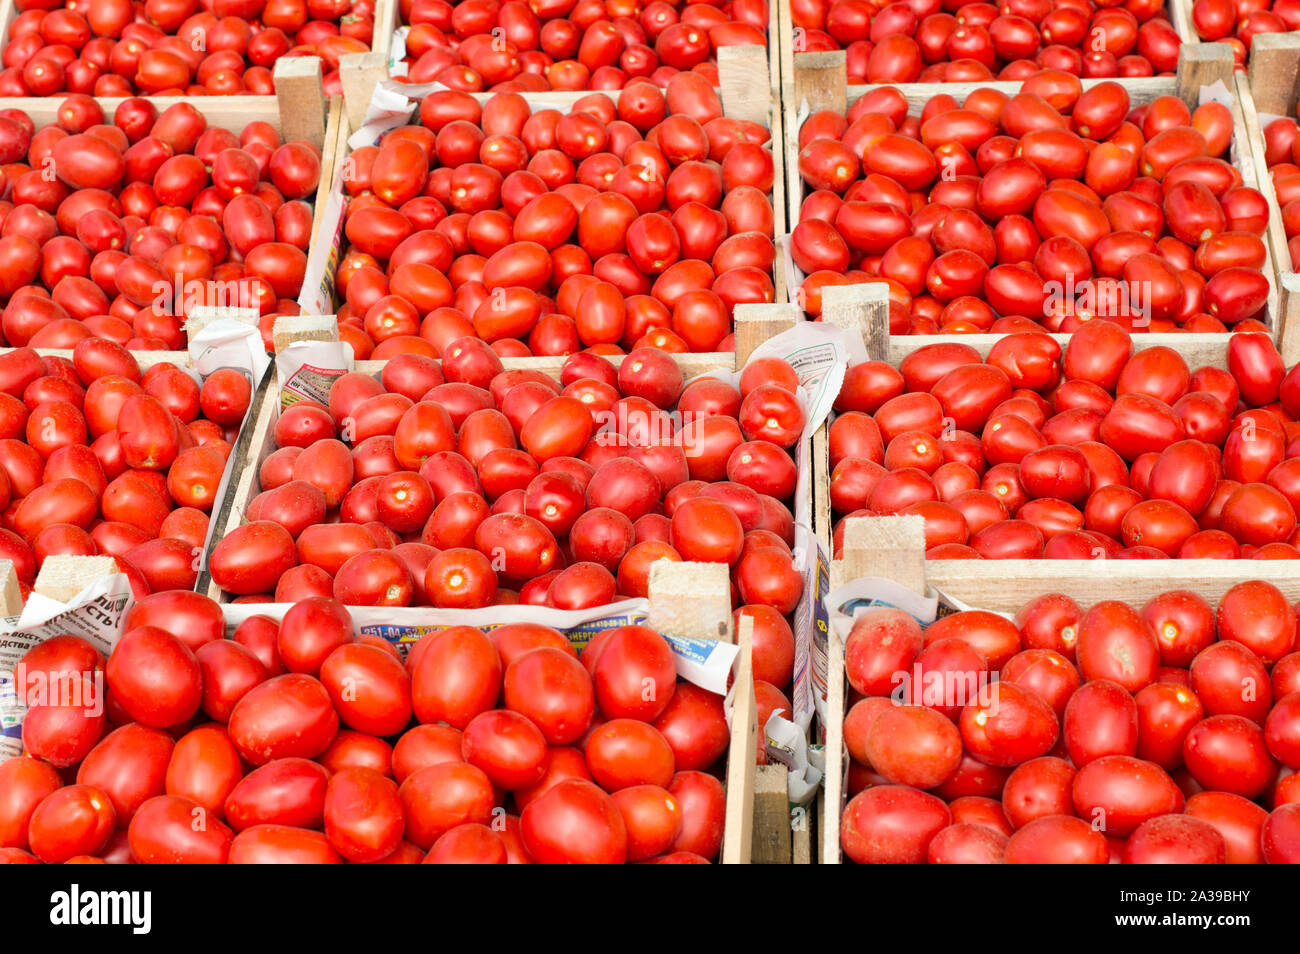 Red ripe tomatoes lie for sale in wooden boxes in the open air market. Stock Photo